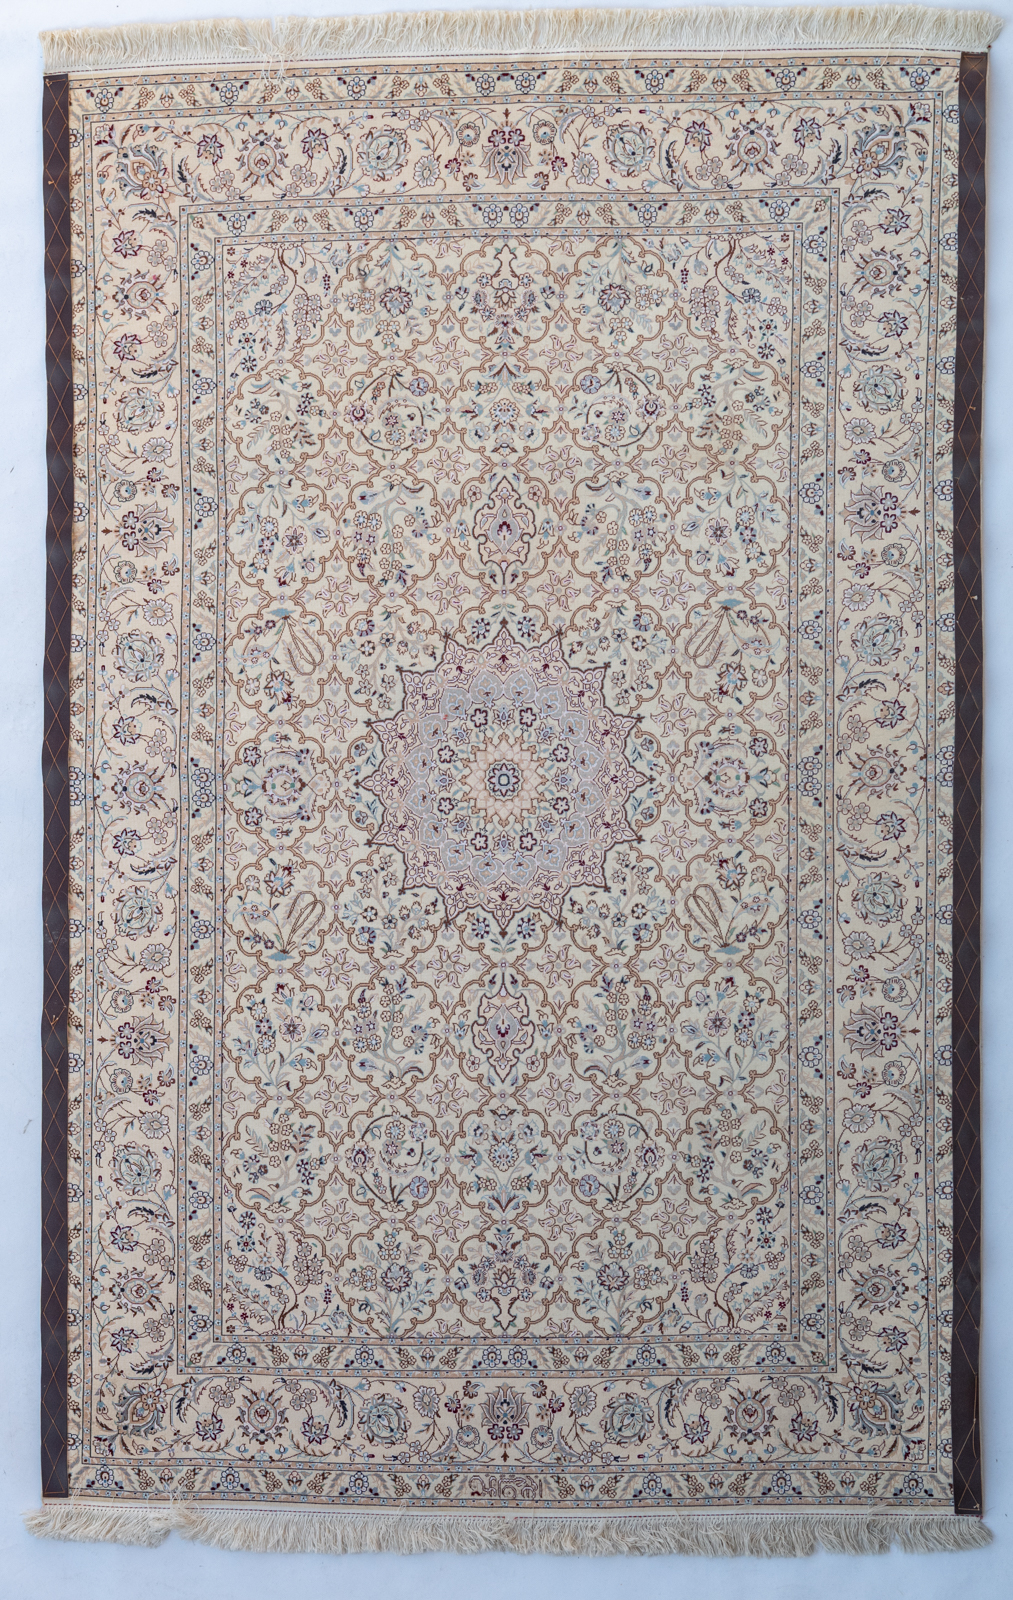 An Oriental woollen rug decorated with floral motifs, signed, 197 x 130 cm - Image 2 of 3